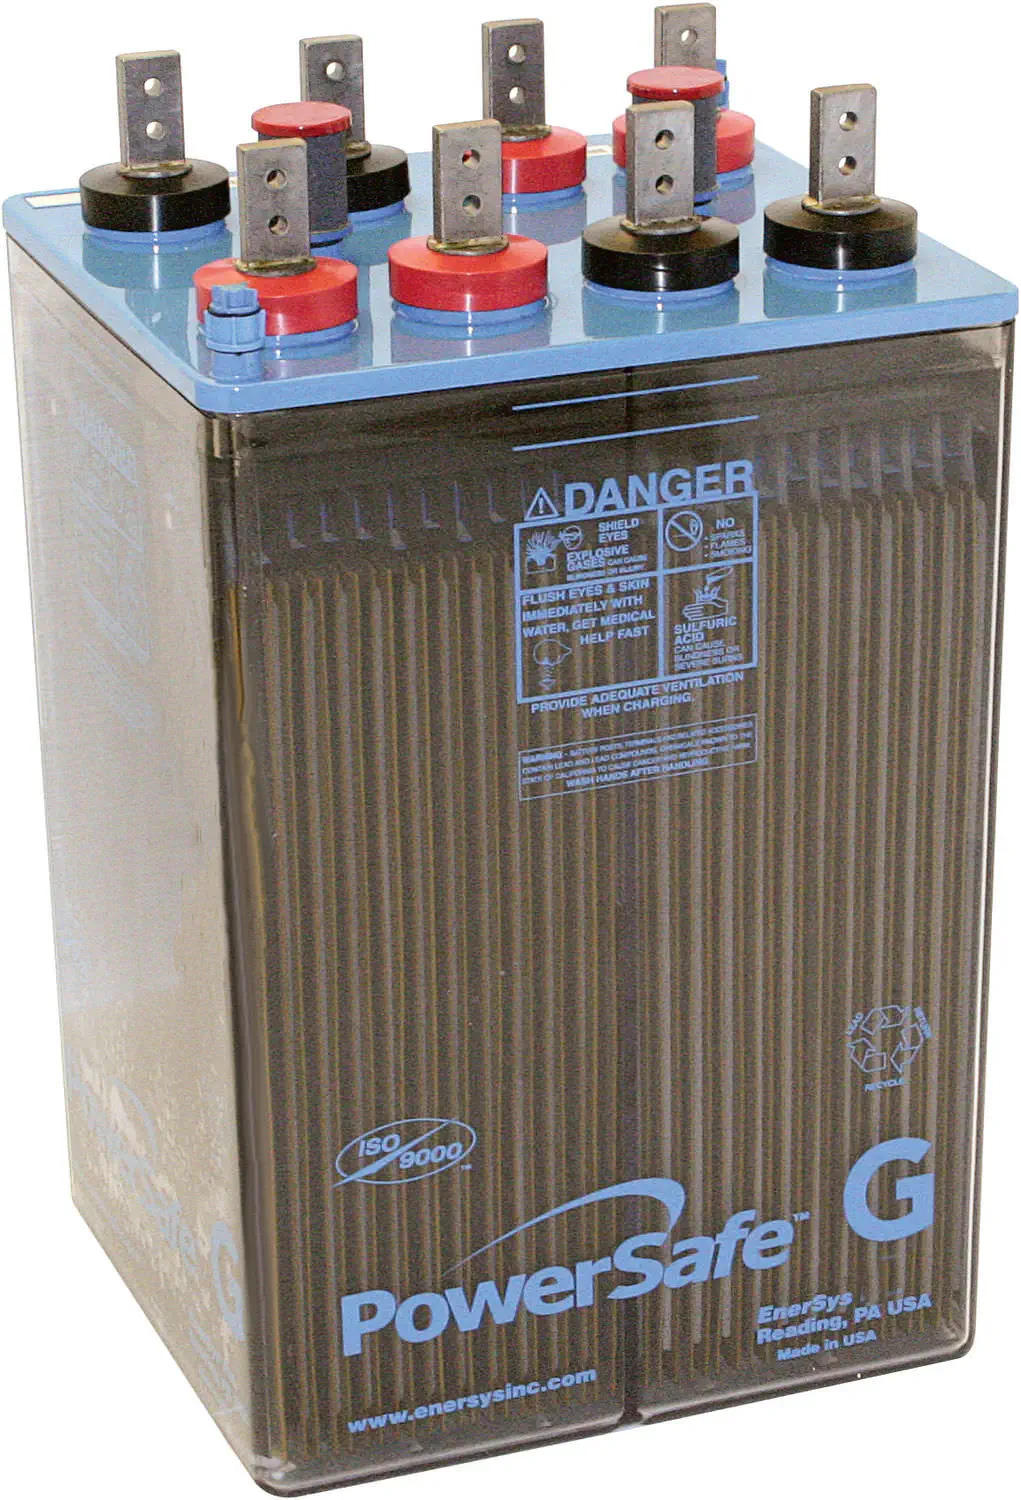 EnerSys PowerSafe GN-25